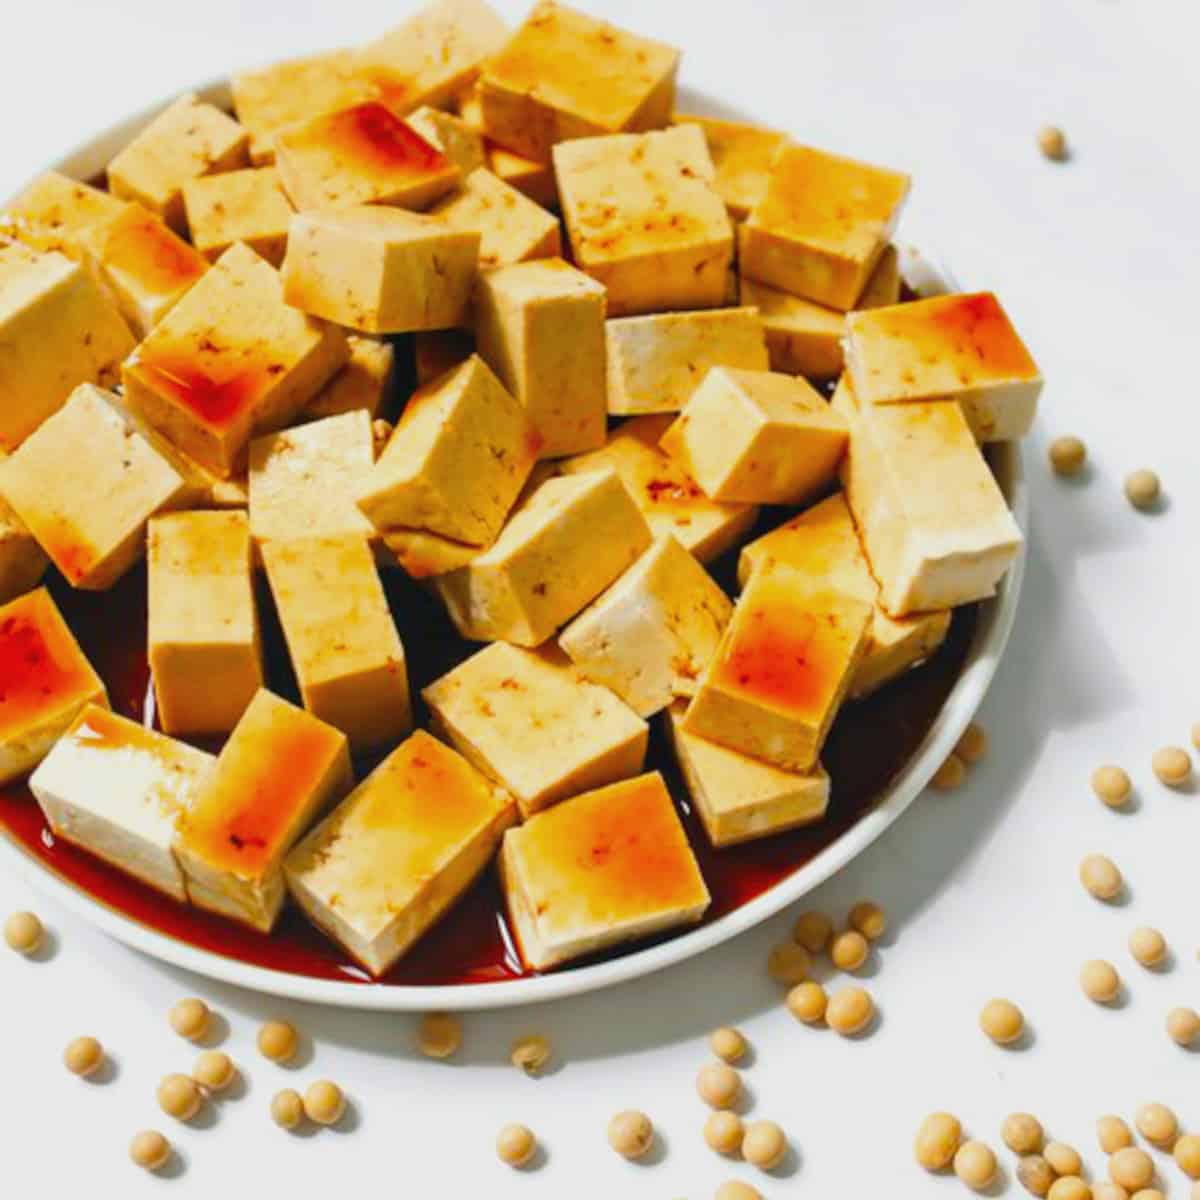 tempeh with soybeans tempeh is a fermented food which is rich in probiotics